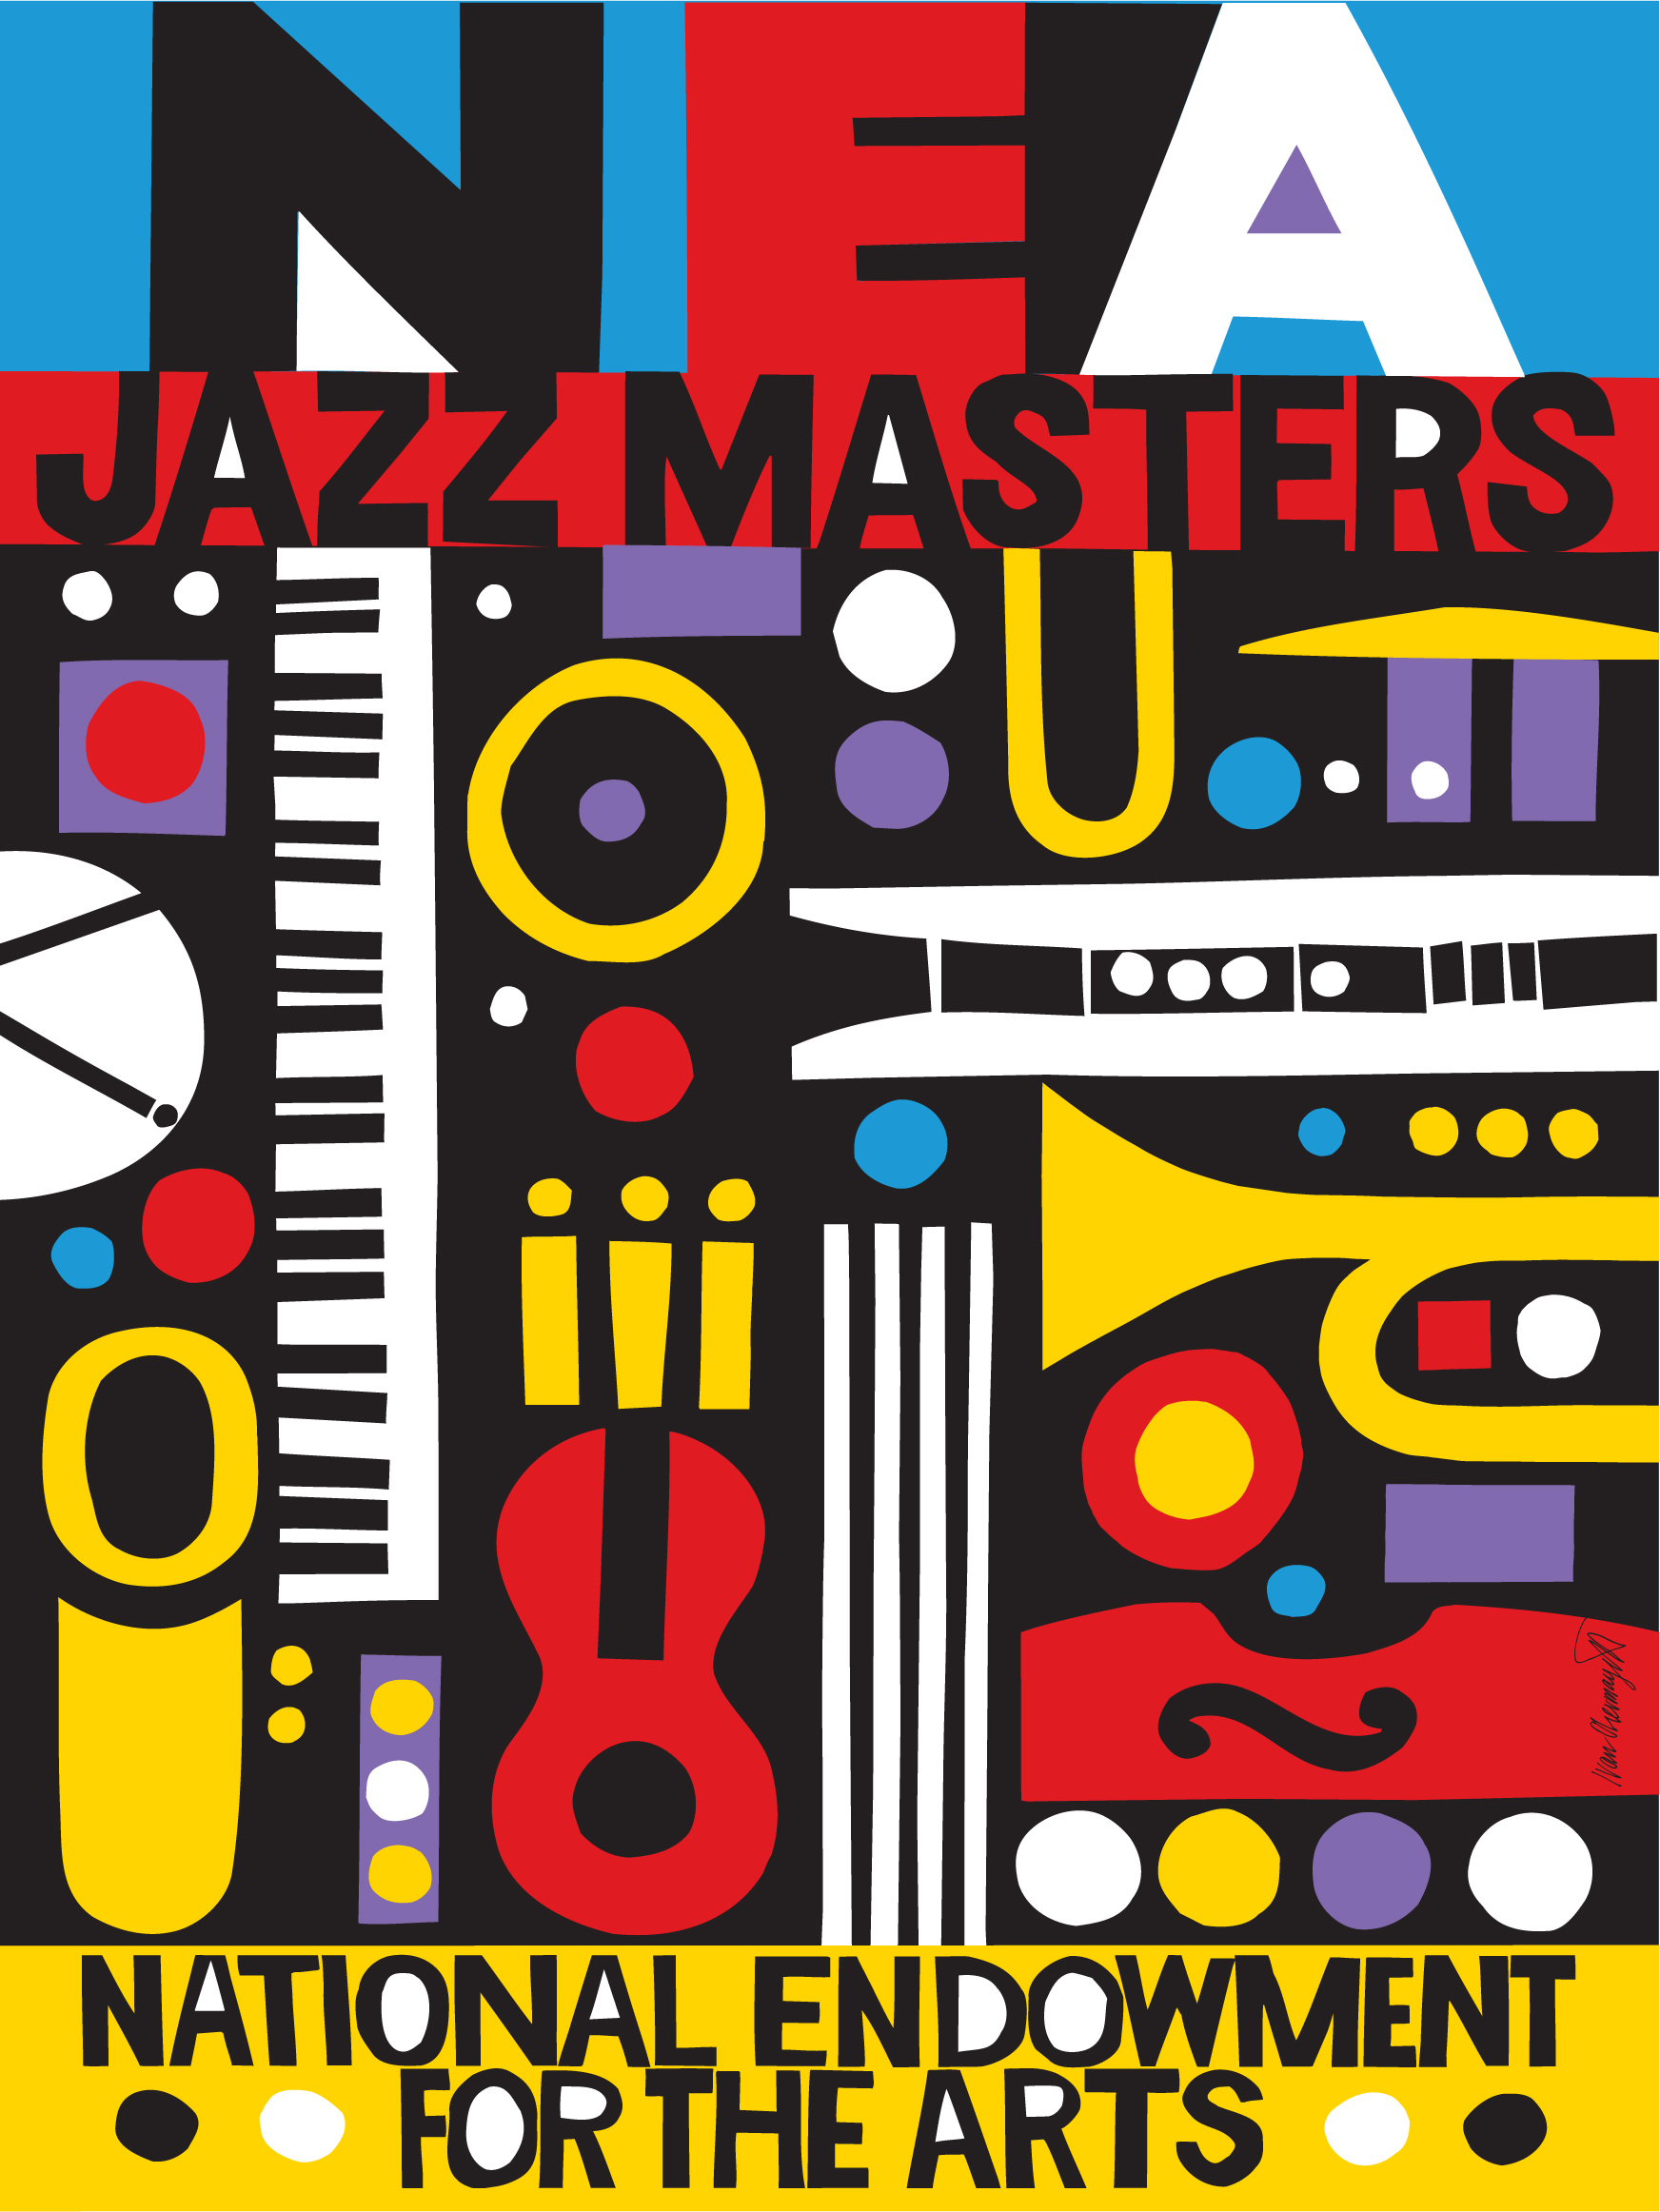 Meet the 2016 NEA Jazz Masters National Endowment for the Arts